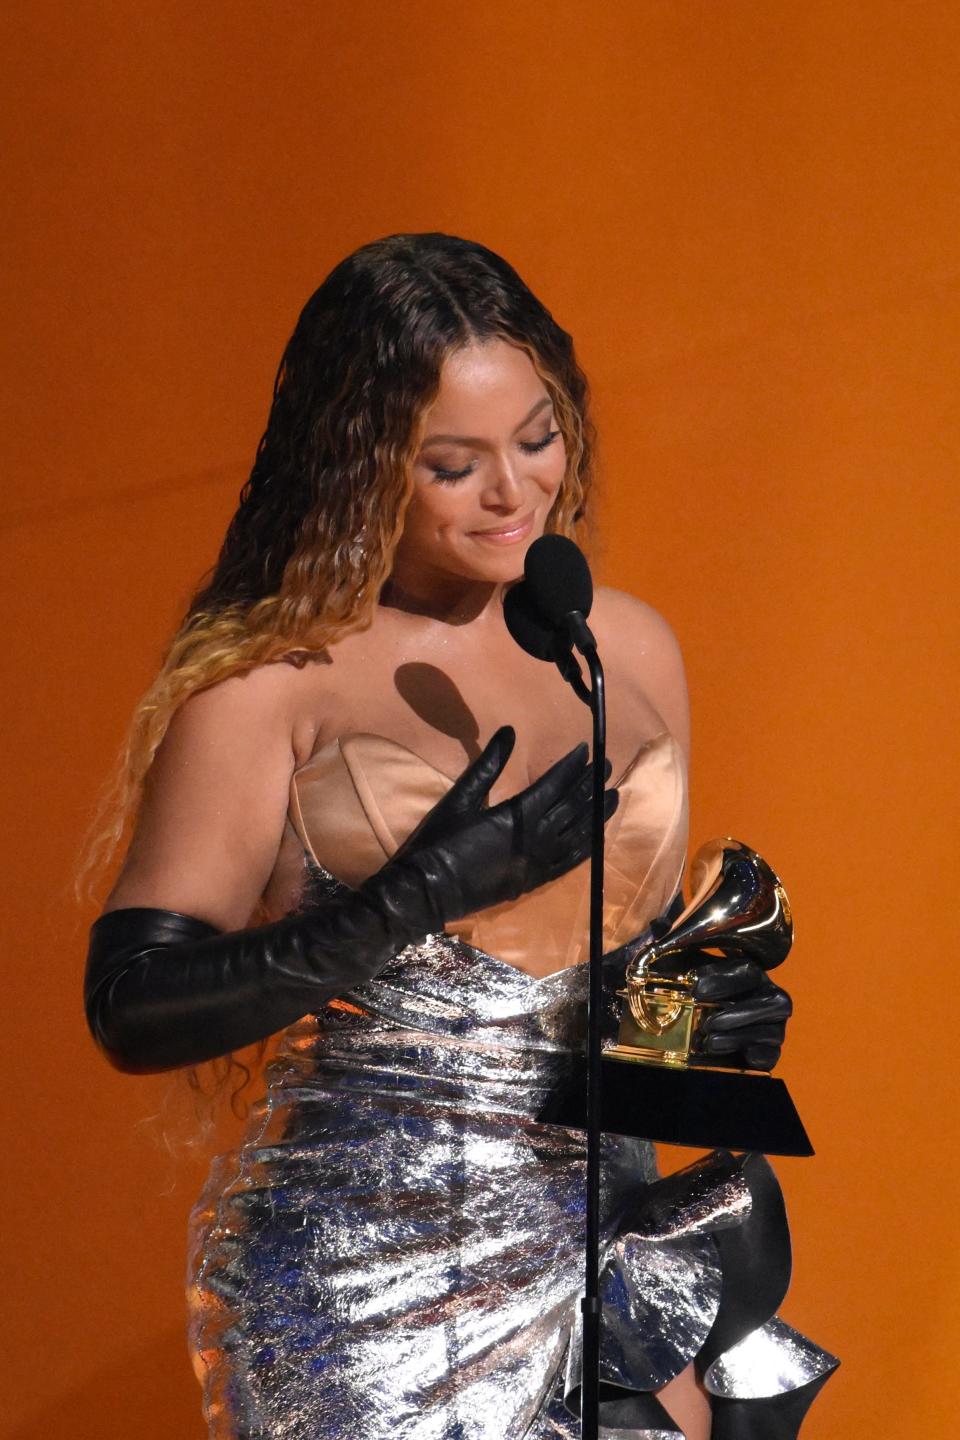 Beyoncé accepts the award for best dance/electronic music album for “Renaissance” becoming the all-time winner for the most Grammy Awards during the 65th Annual Grammy Awards at Crypto.com Arena in Los Angeles on Sunday, Feb. 5, 2023.